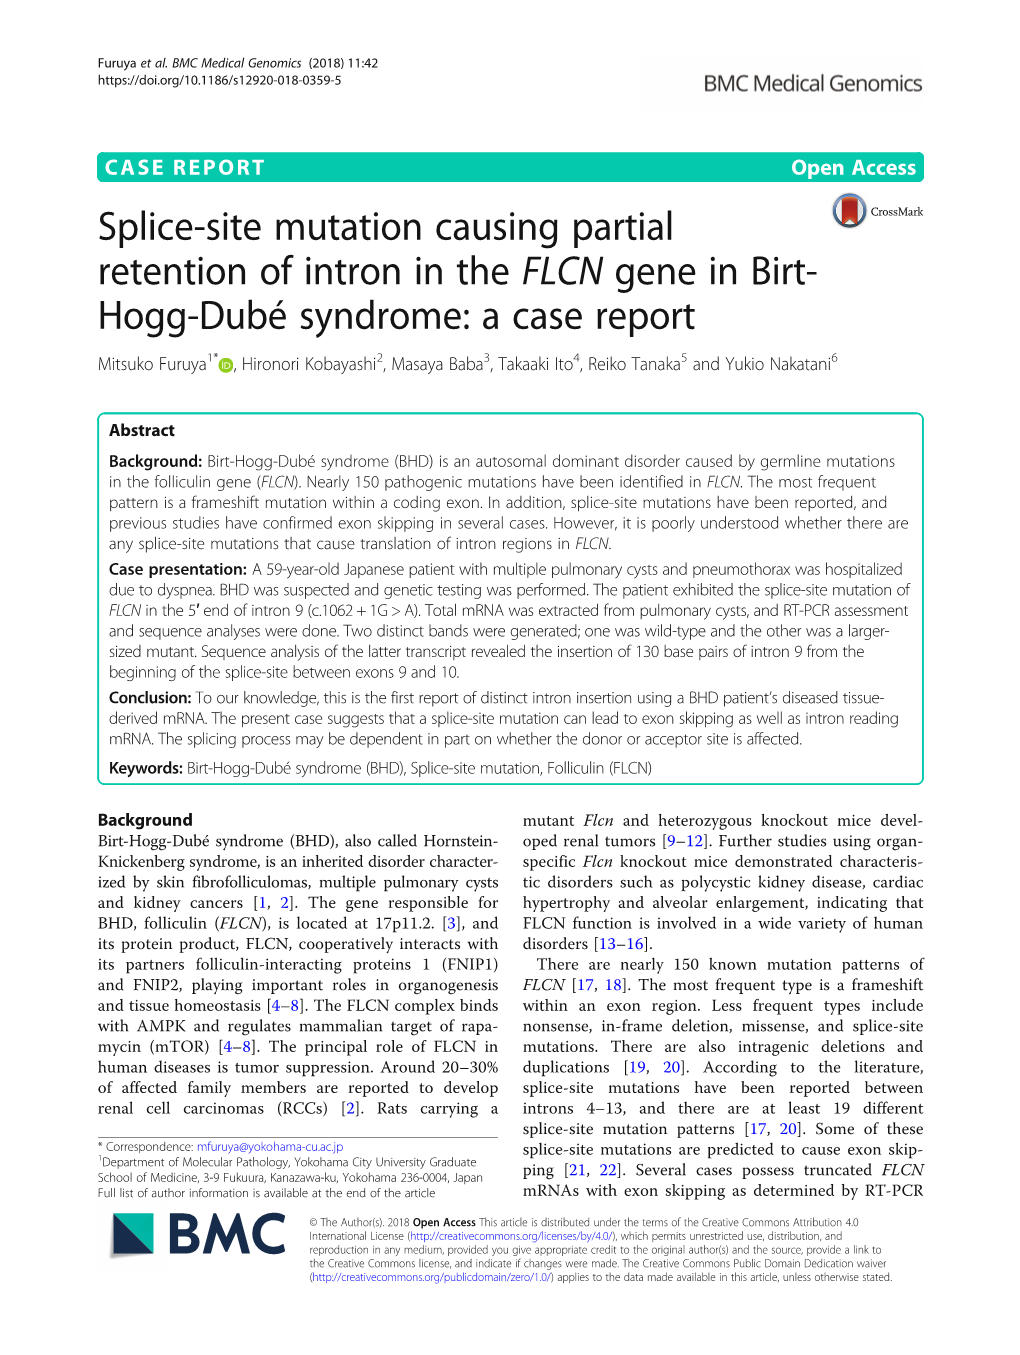 Splice-Site Mutation Causing Partial Retention of Intron in the FLCN Gene in Birt-Hogg-Dubé Syndrome